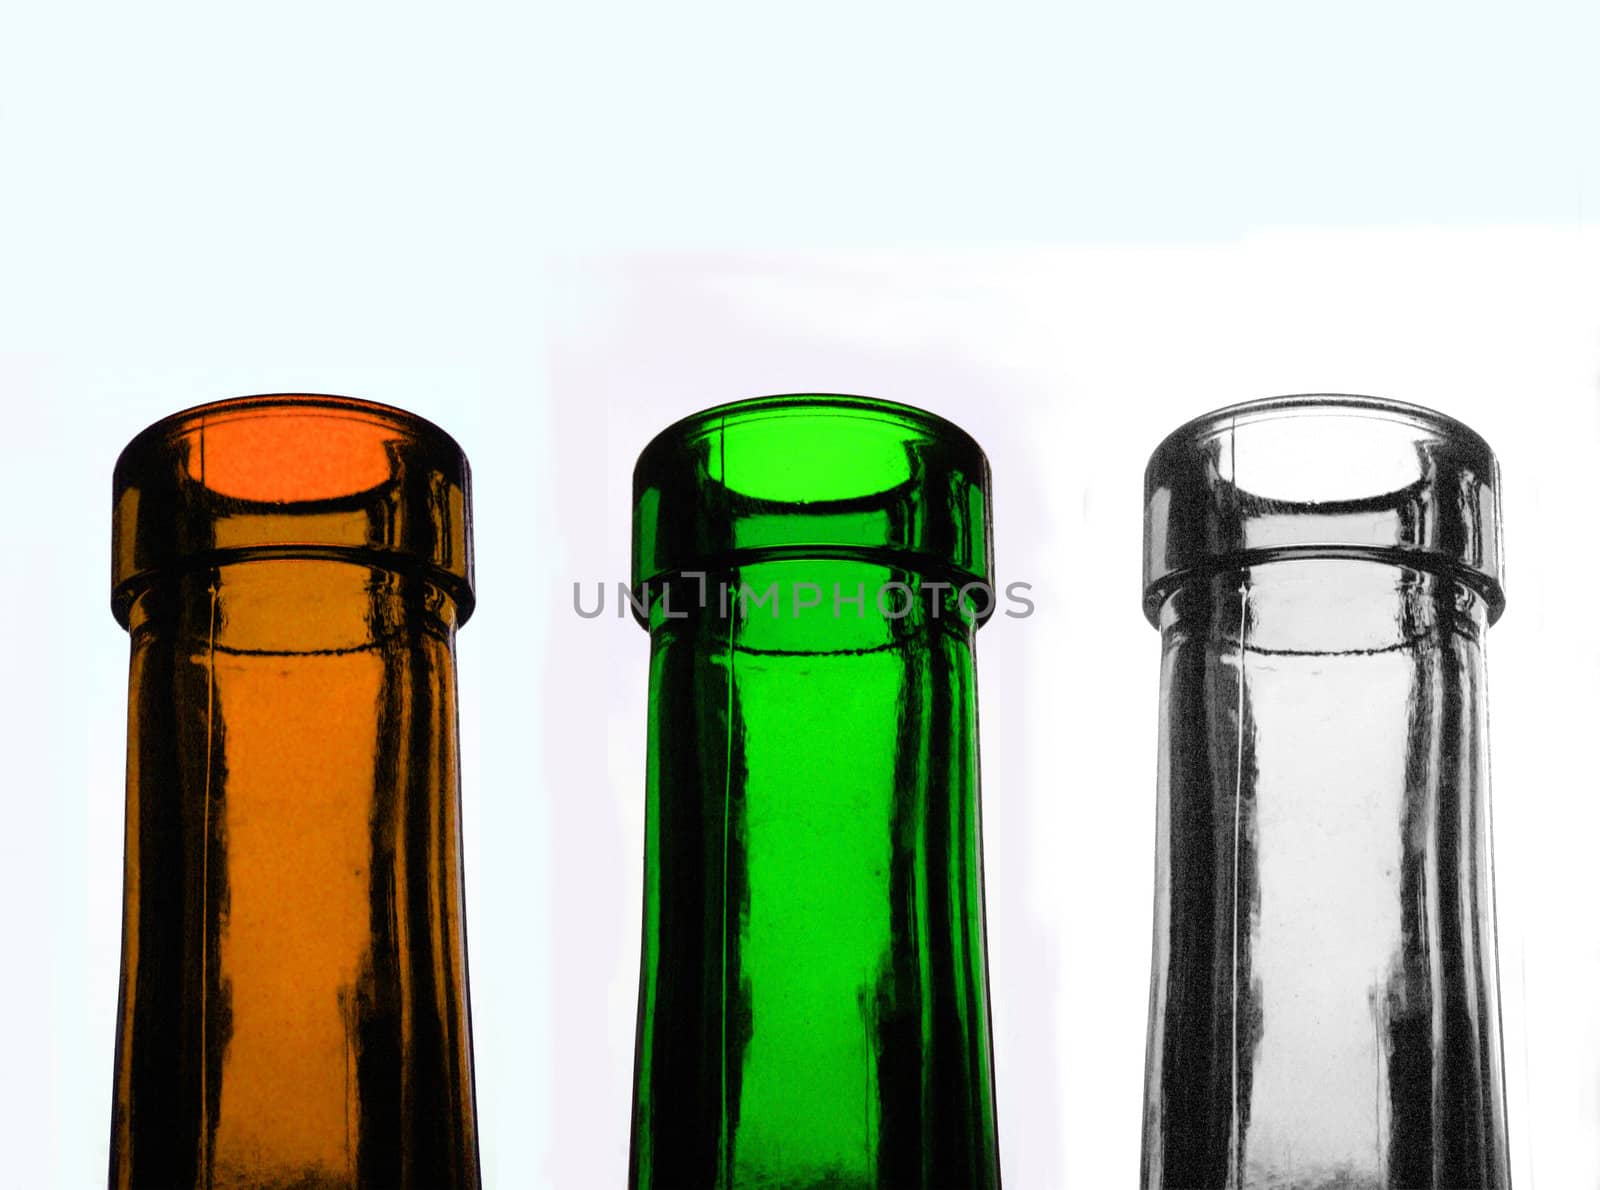 three recycable glass bottles in different colours, transparent, green, brown